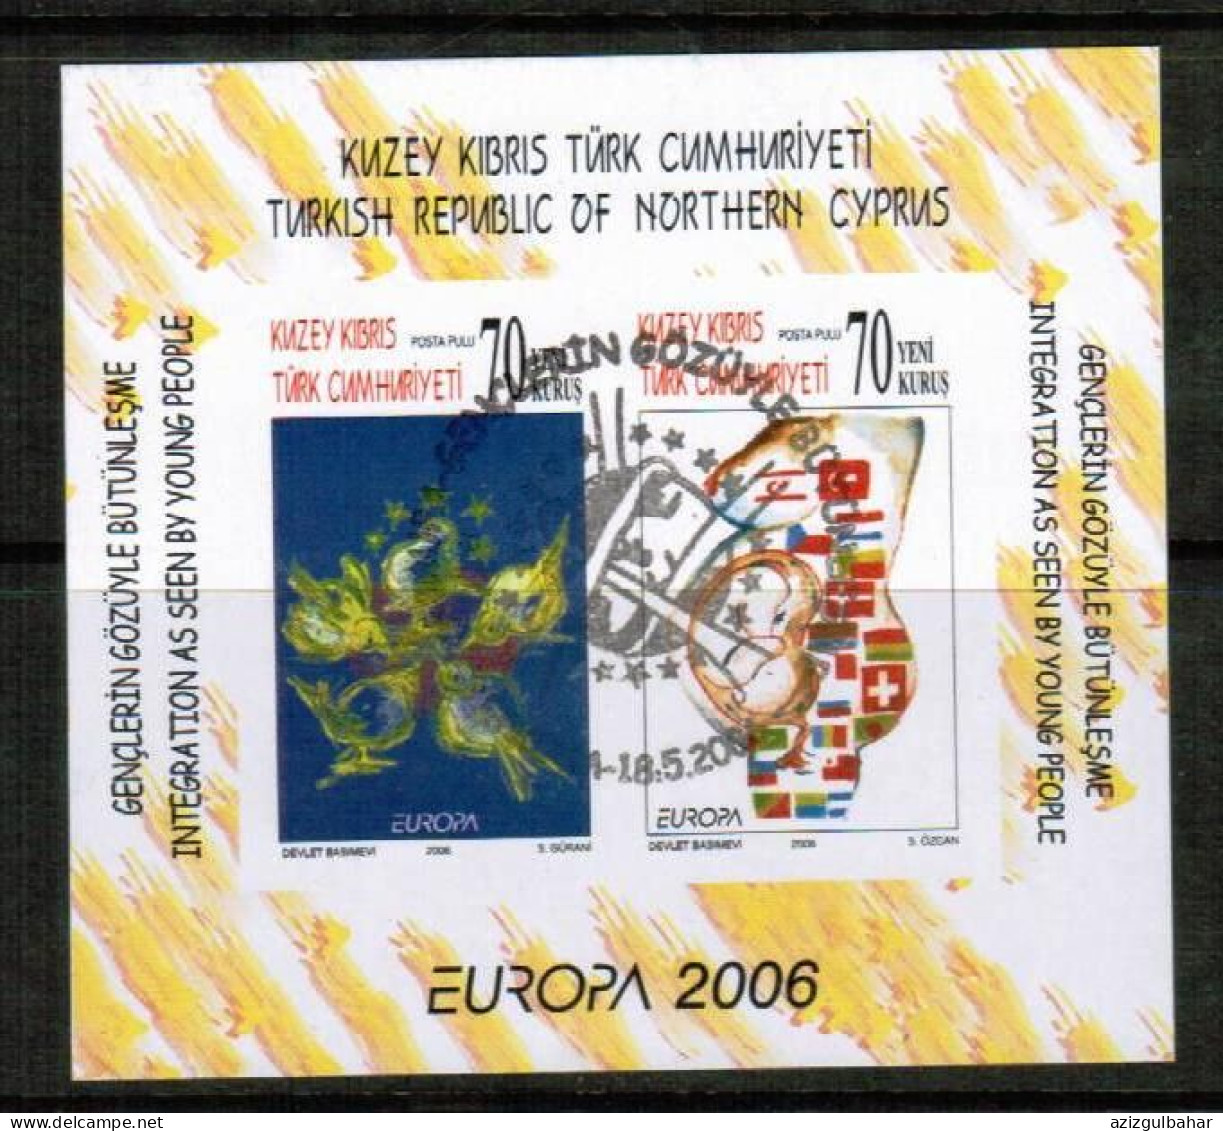 2006 - EUROPA  - INTEGRATION AS SEEN BY YOUR PEOPLE -  TURKISH CYPRIOT STAMPS - USED BLOCK - Used Stamps